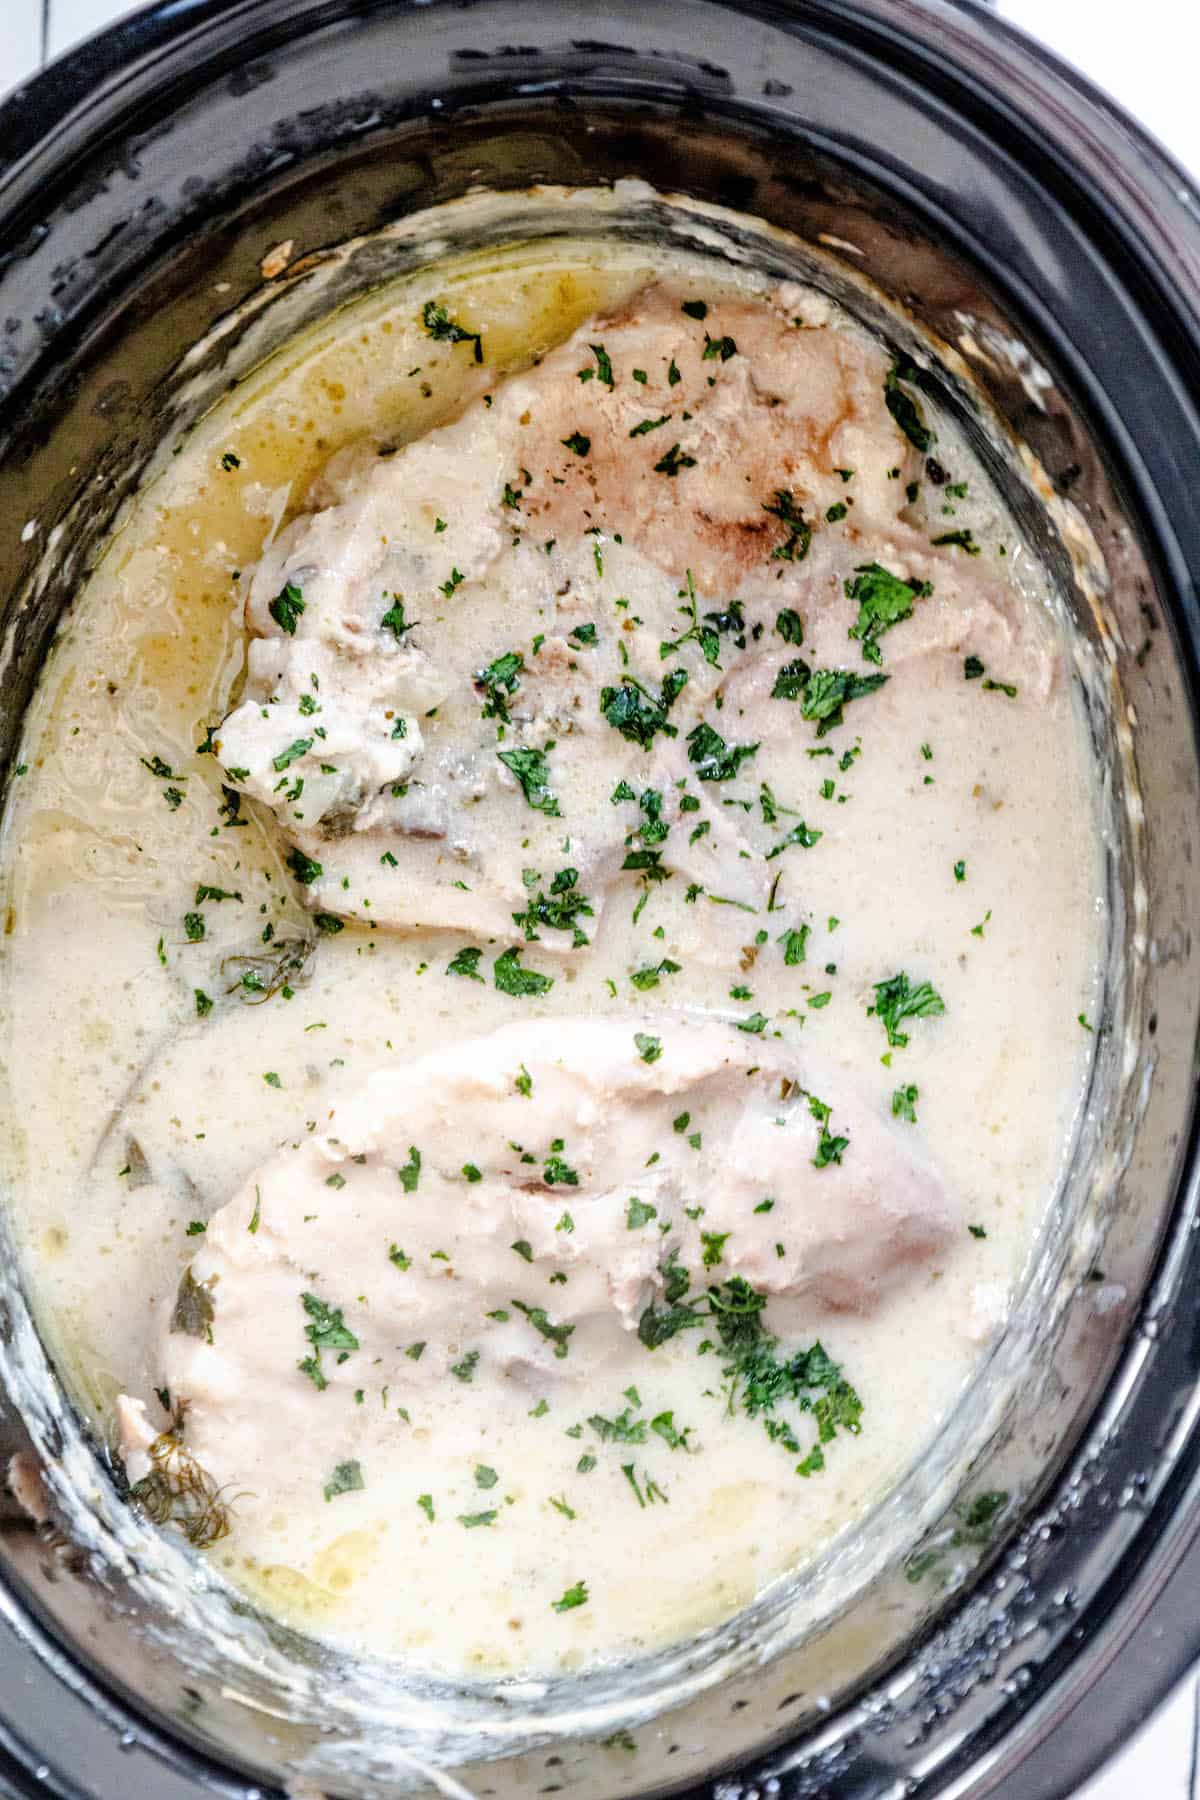 A crock pot filled with creamy chicken and gravy.